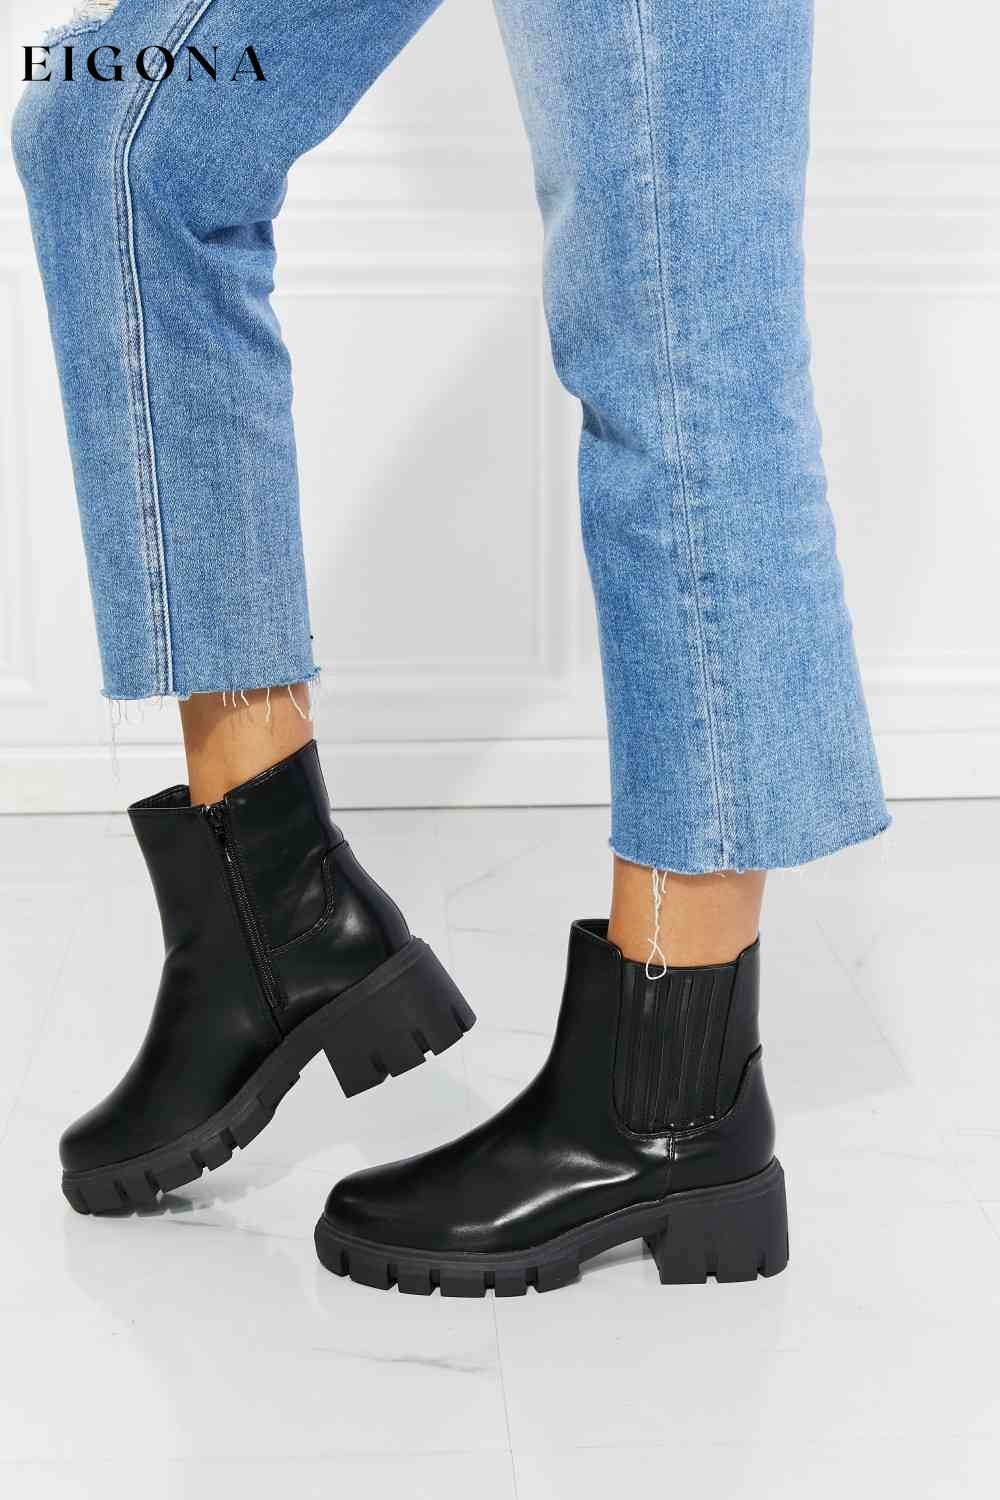 Black Booties, Shoes What It Takes Lug Sole Chelsea Boots in Black Melody Ship from USA shoes womens shoes